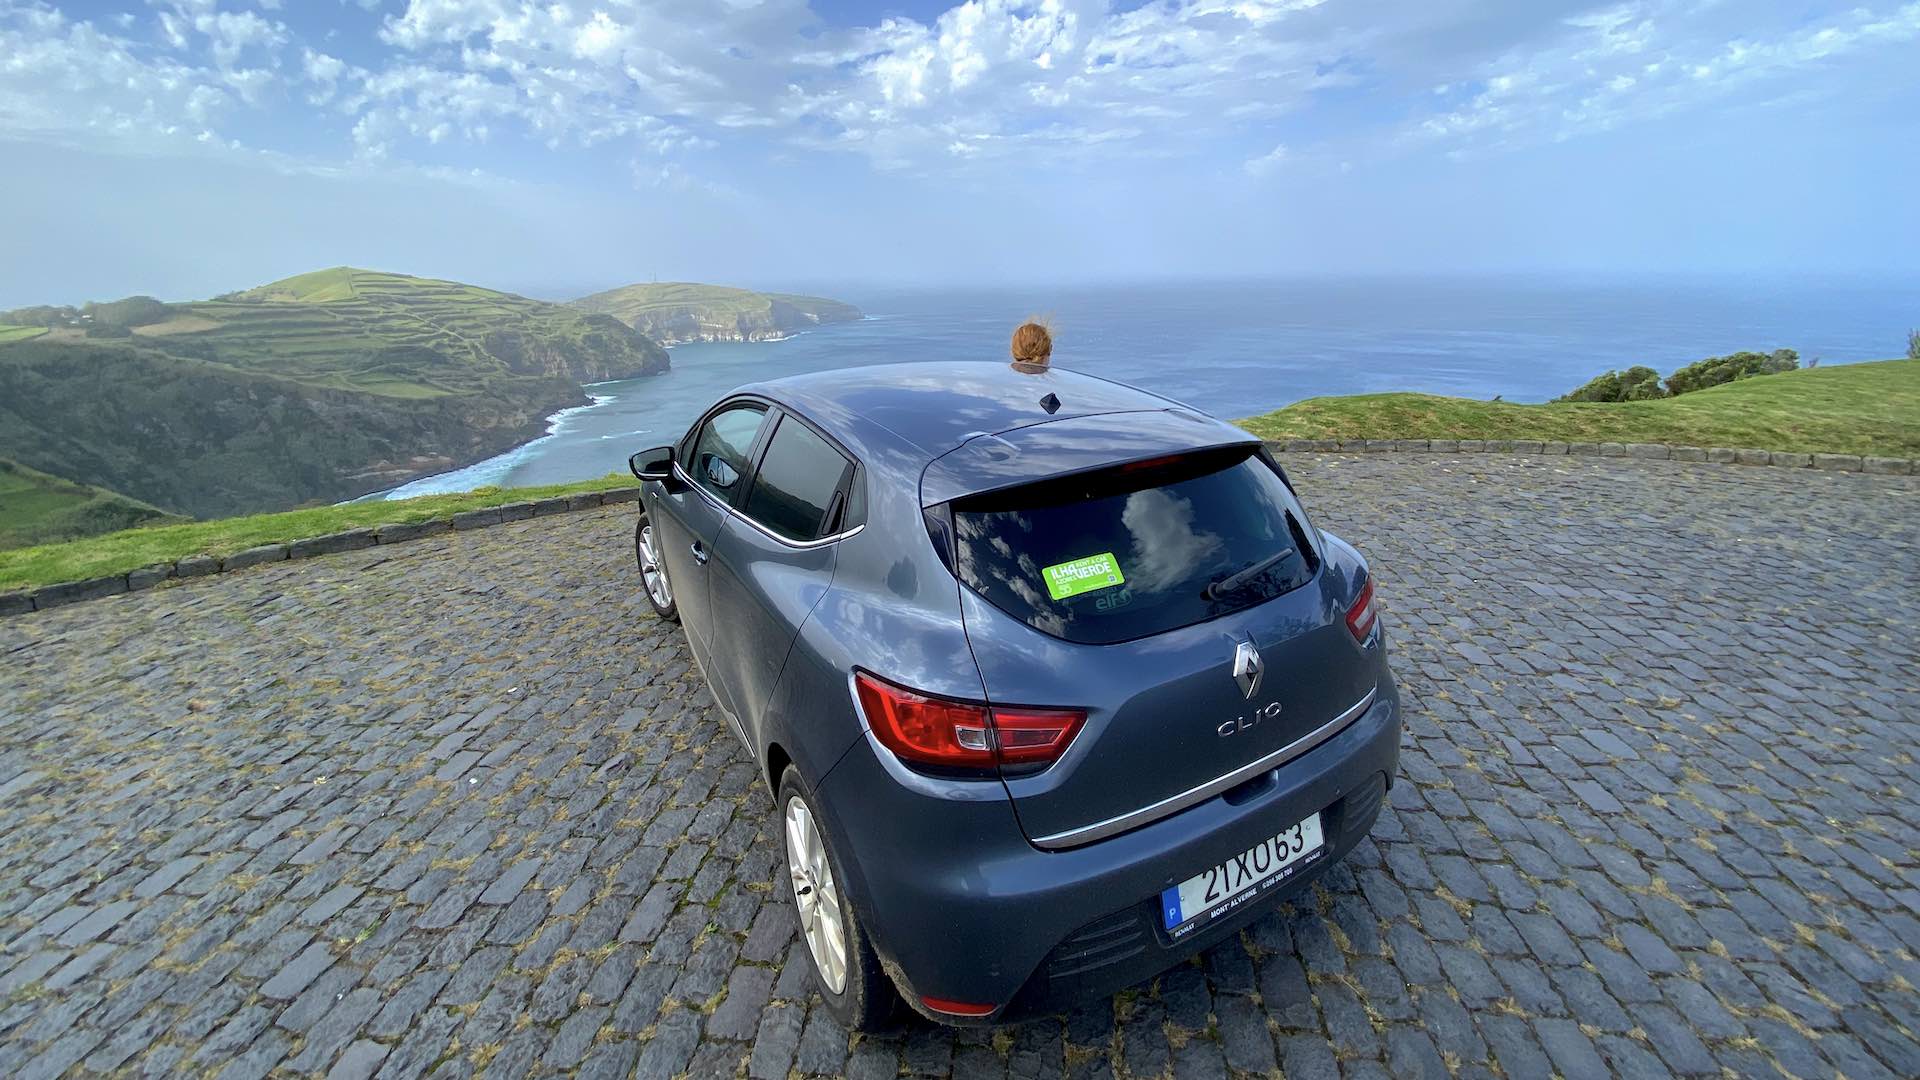 Those views in the Azores!